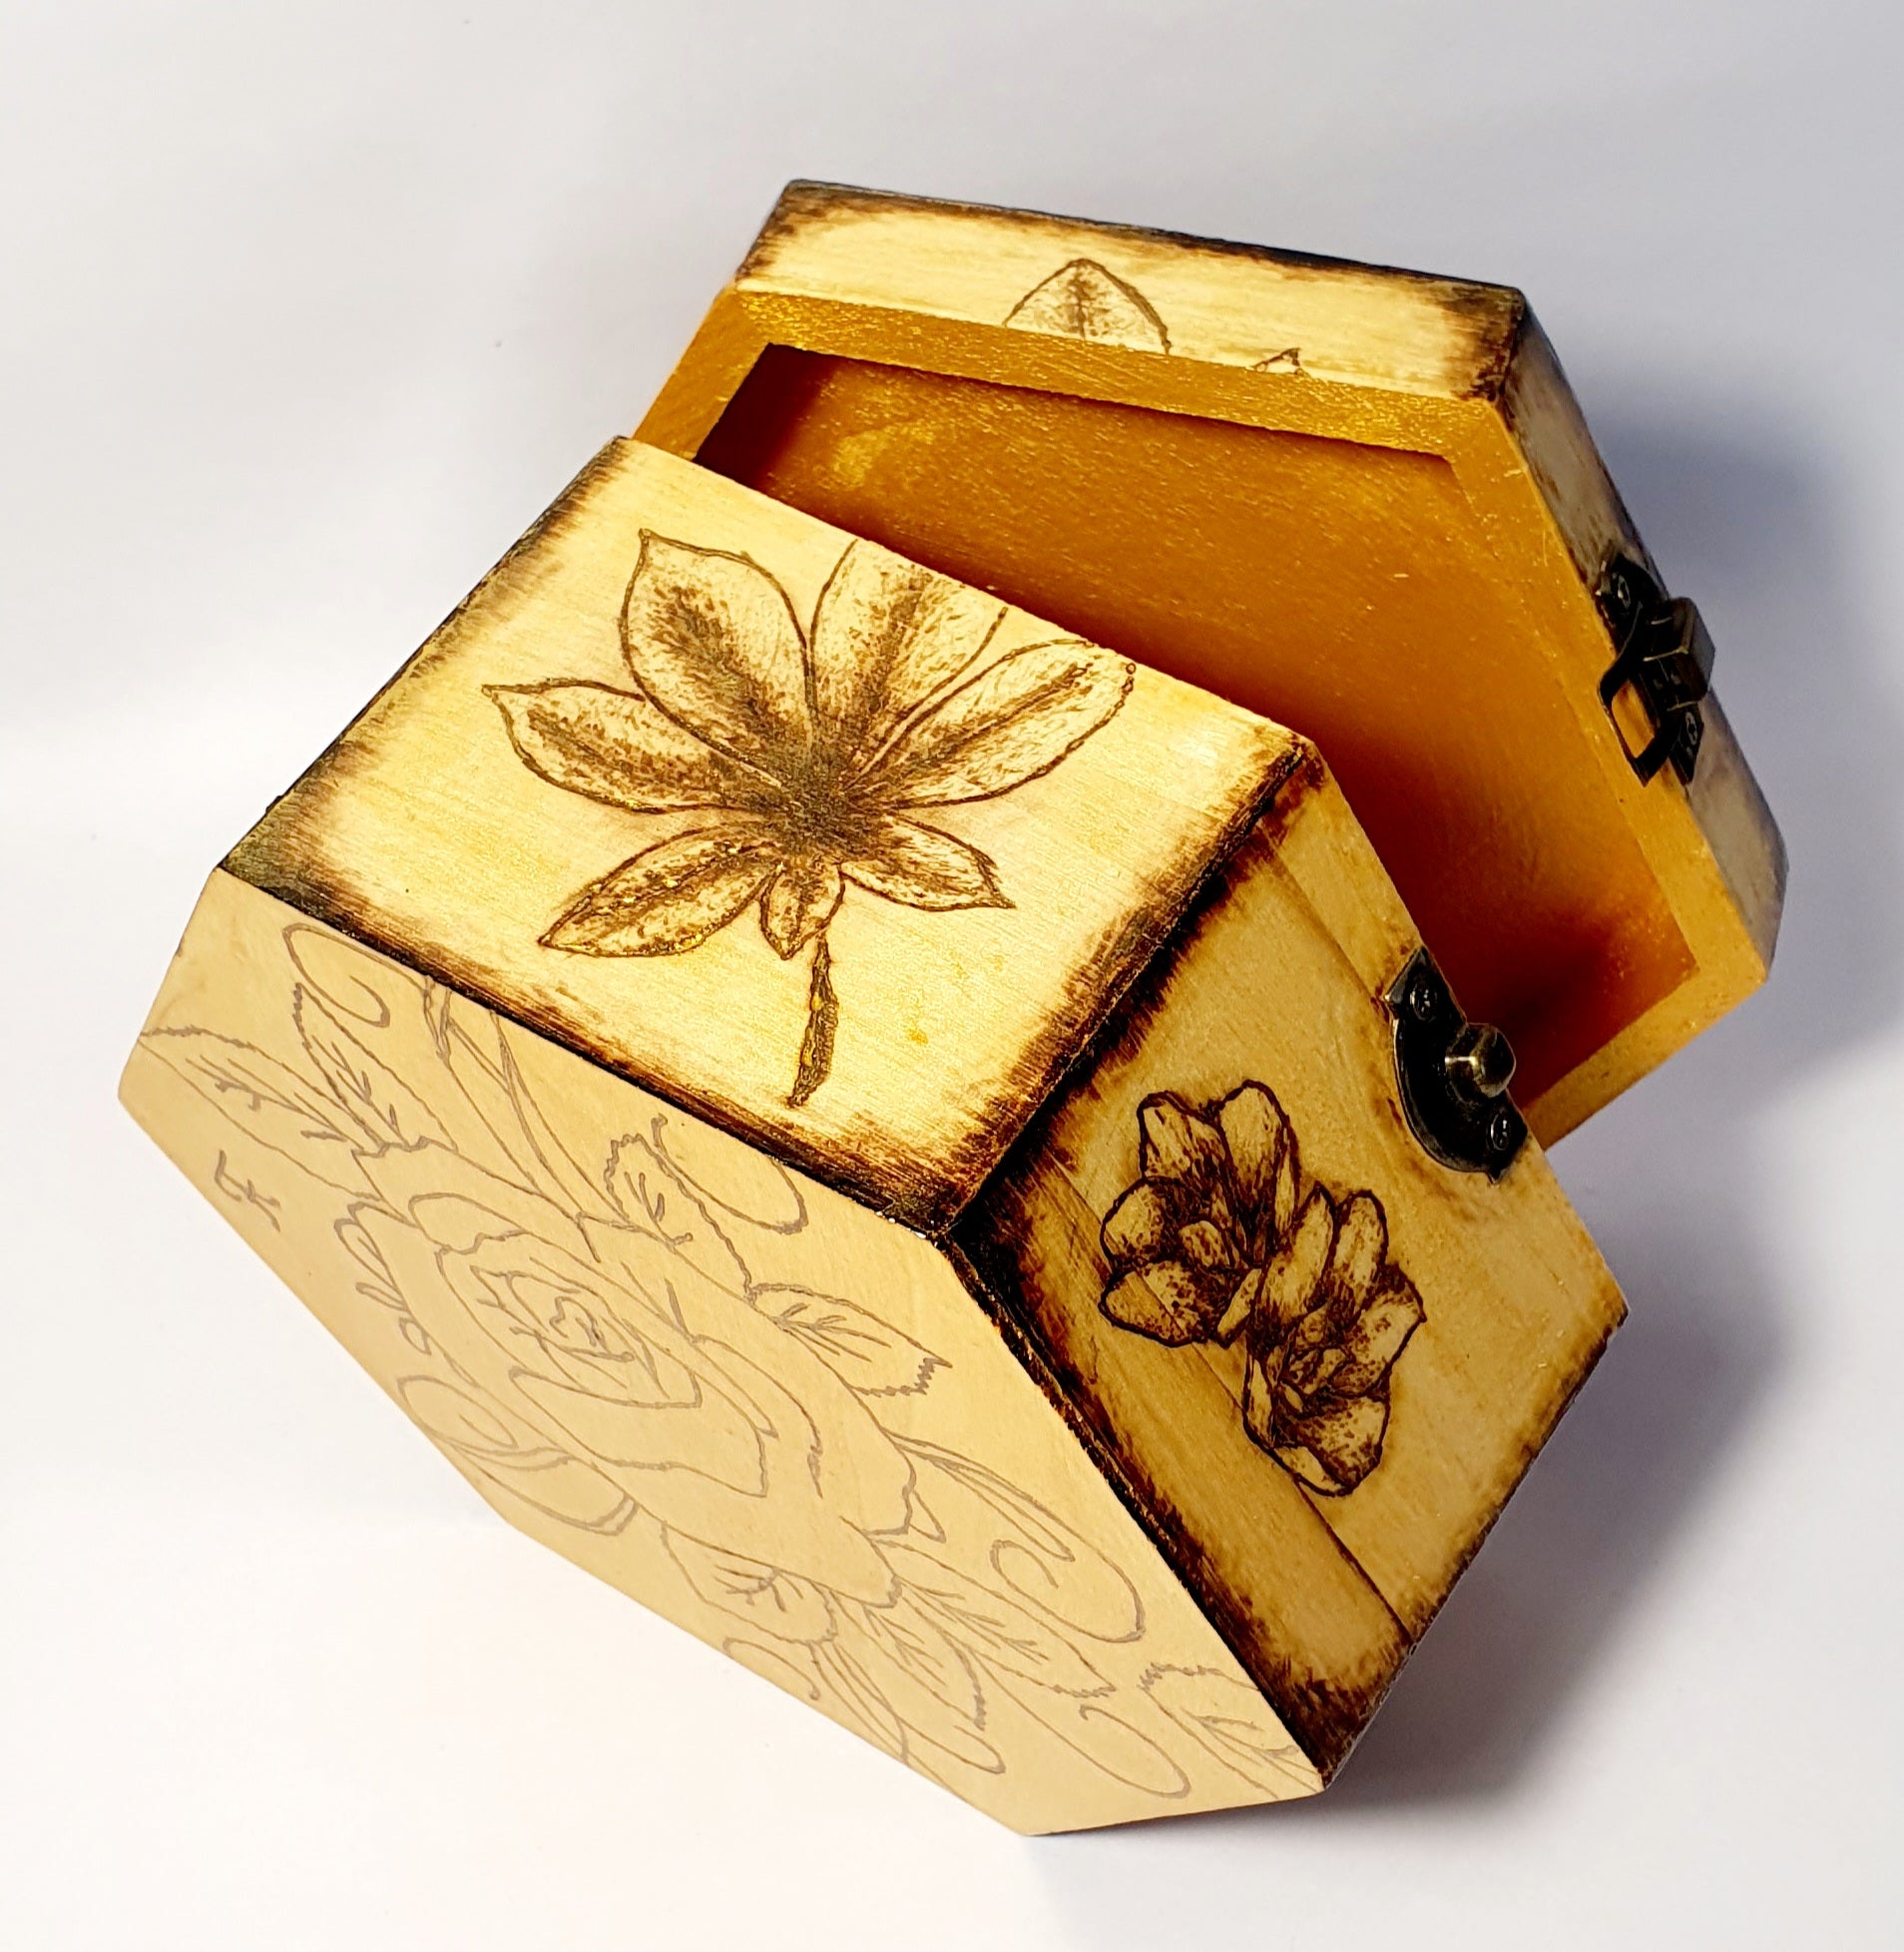 inside gold pyrography wooden box